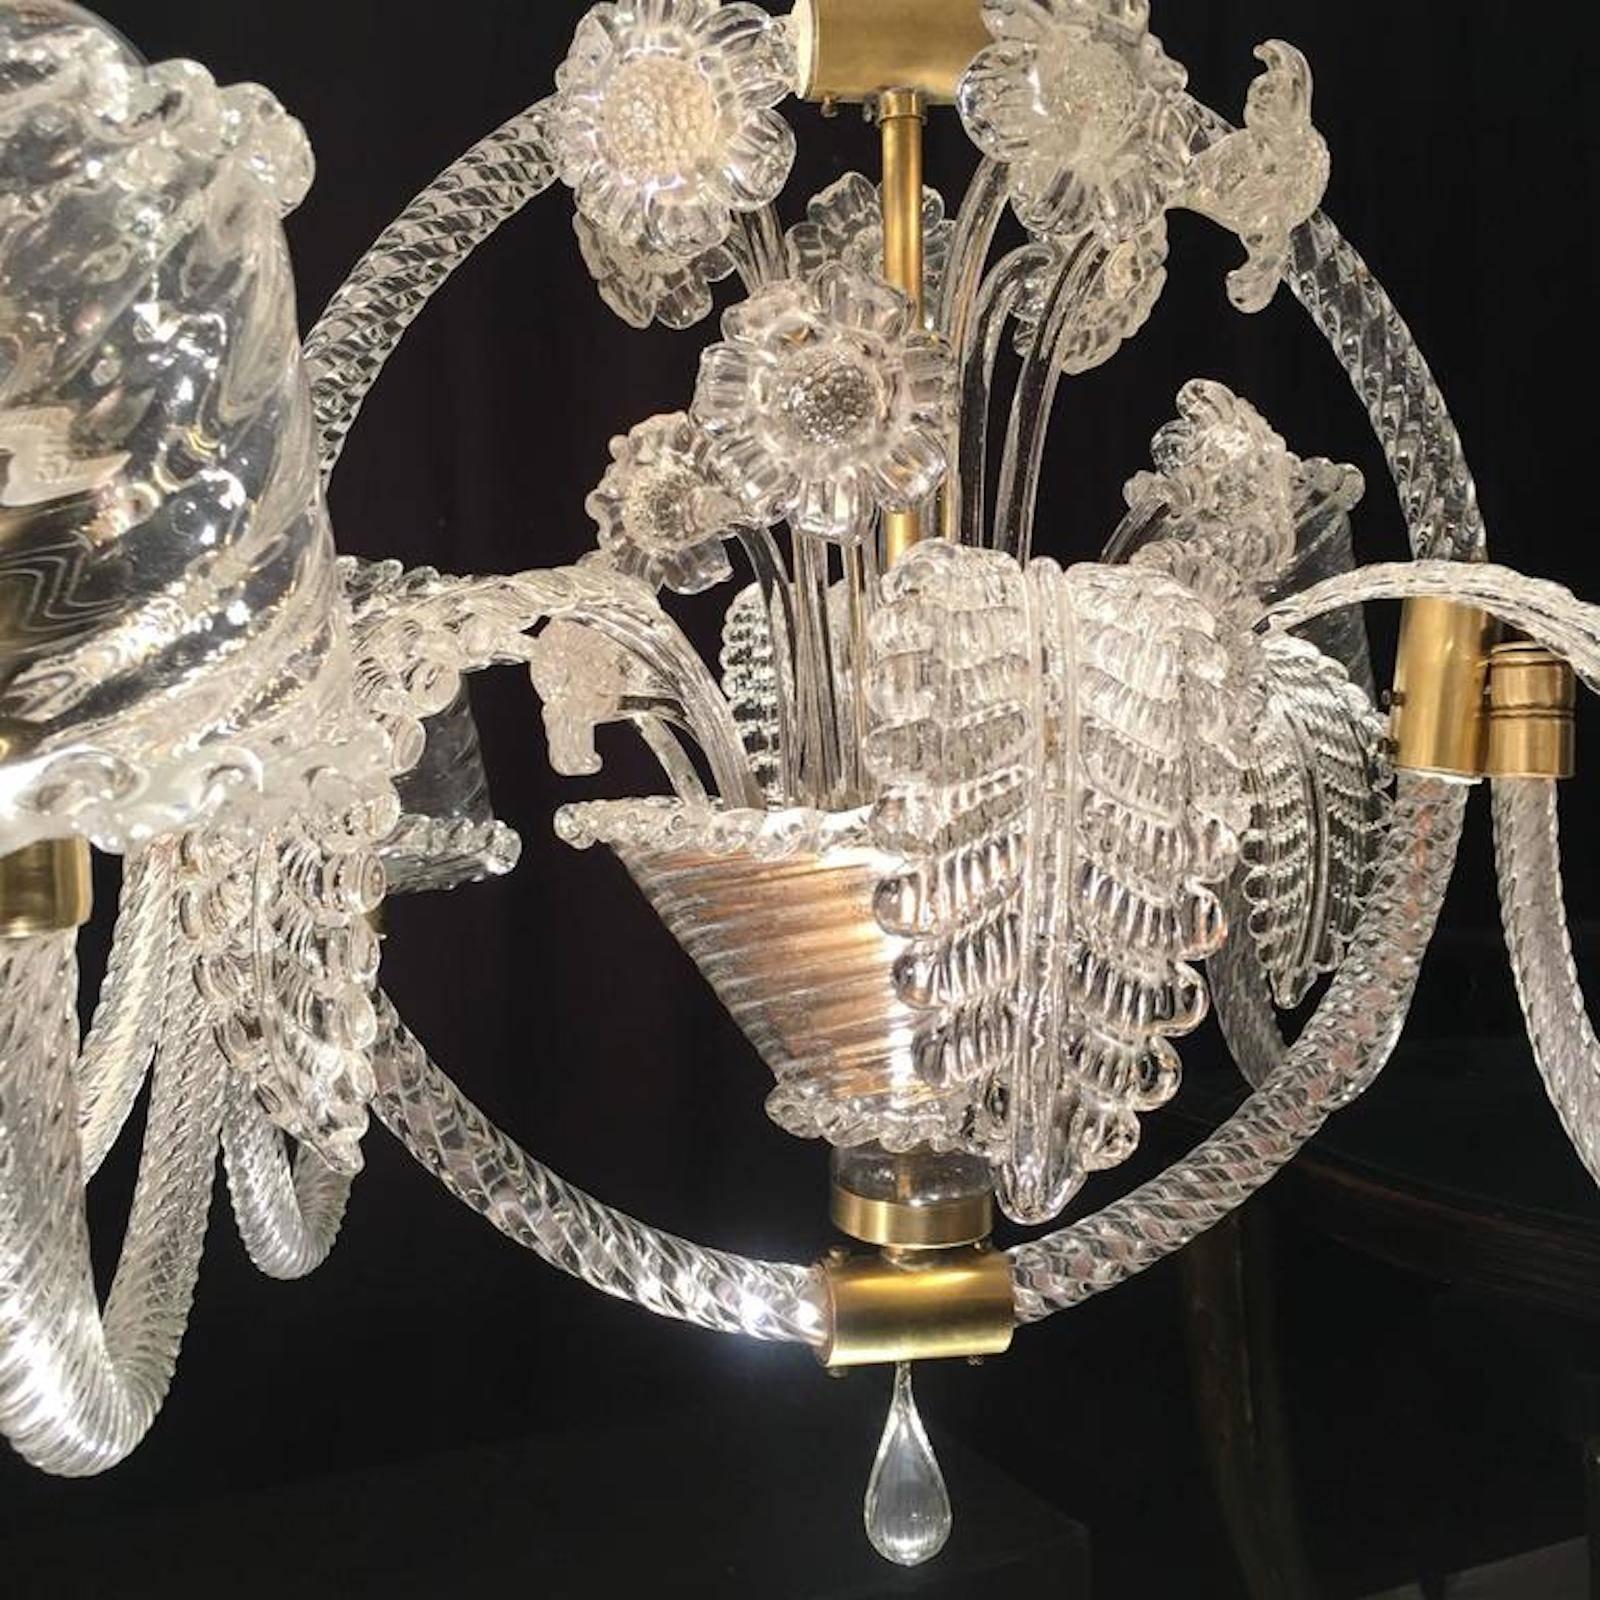 Majestic Liberty Chandelier by Ercole Barovier, Murano, 1940s For Sale 4